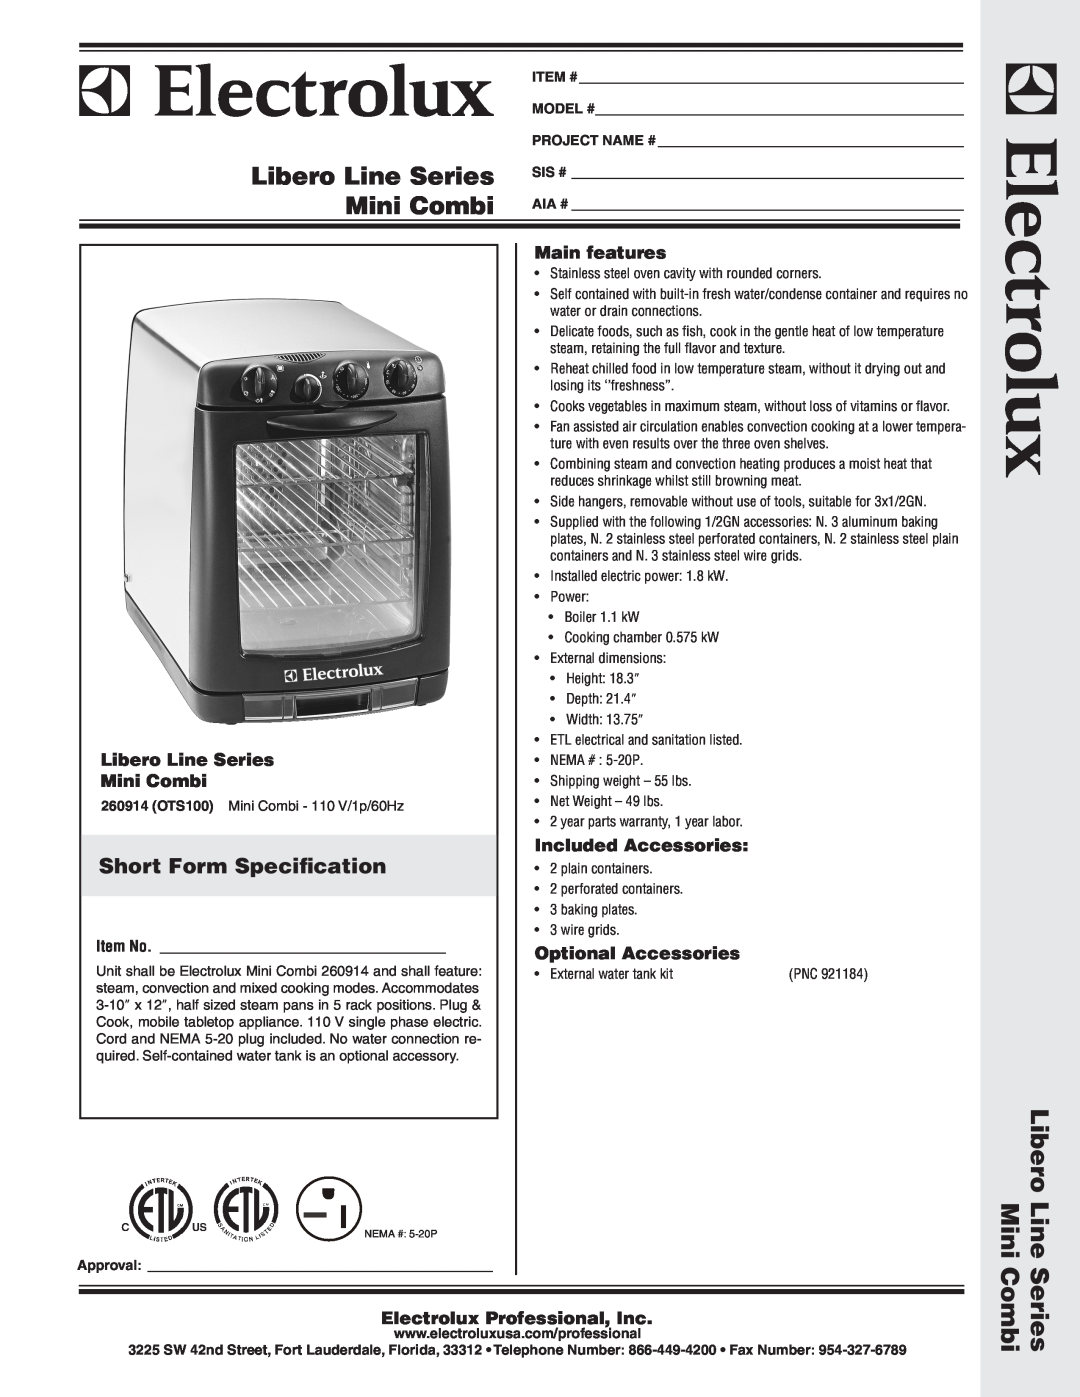 Electrolux 260914 dimensions Short Form Specification, Main features, Libero Line Series, Mini Combi, Included Accessories 